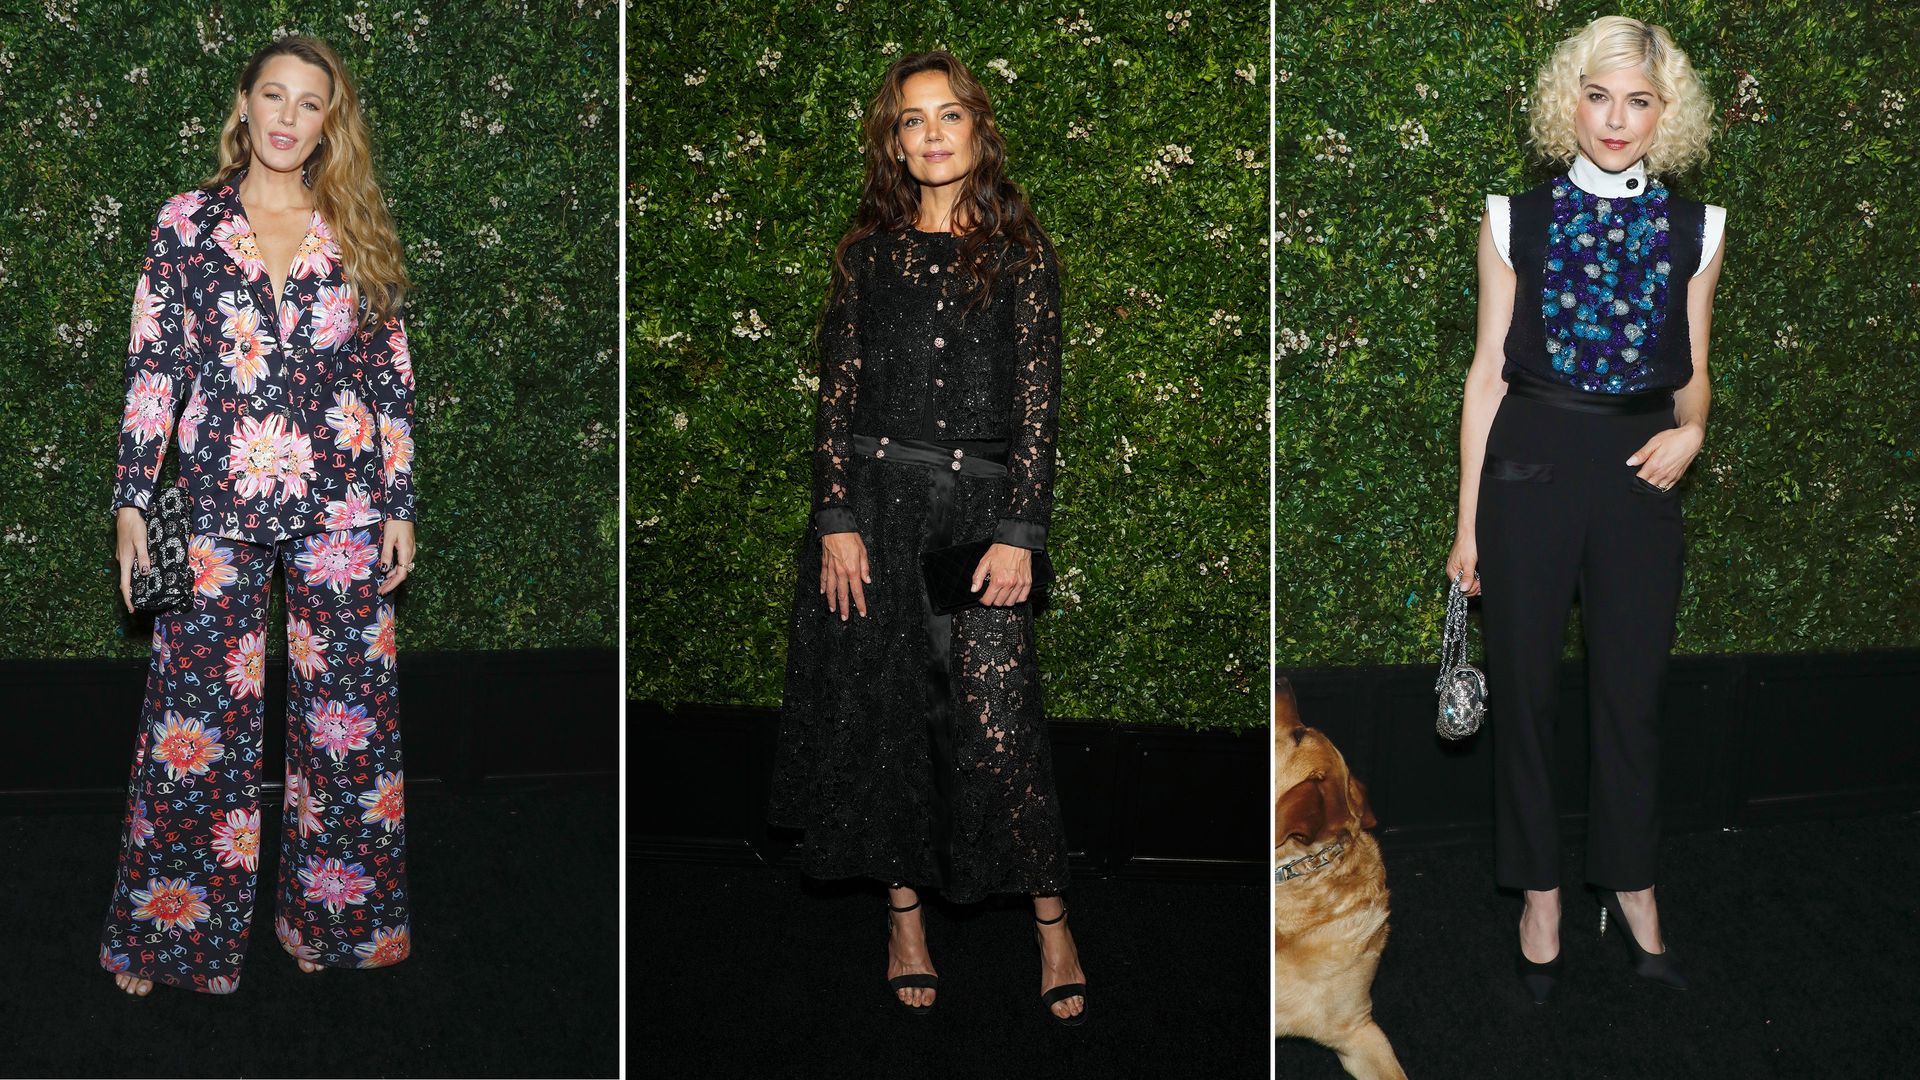 Blake Lively, Katie Holmes and Selma Blair at the Chanel Tribeca Festival Artists dinner